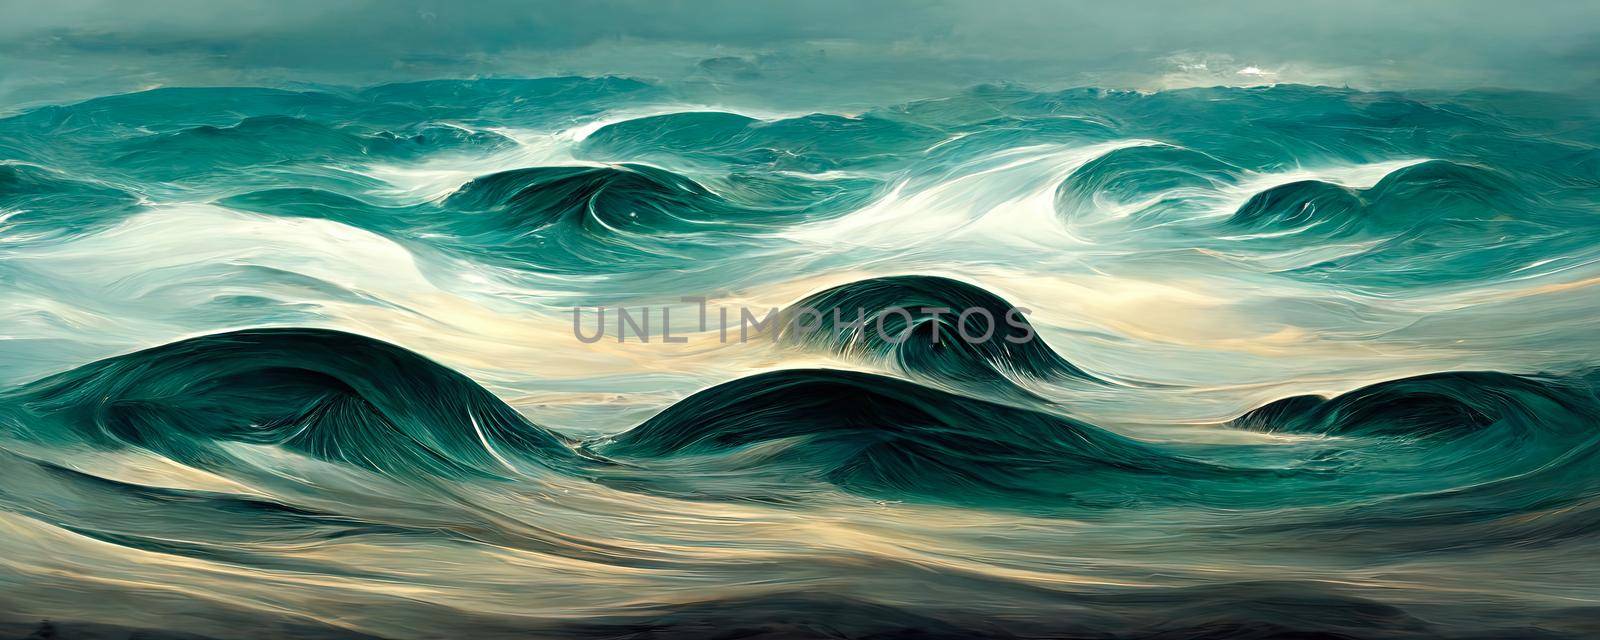 turquoise sea with waves, Colorful abstract wallpaper texture background illustration by TRMK